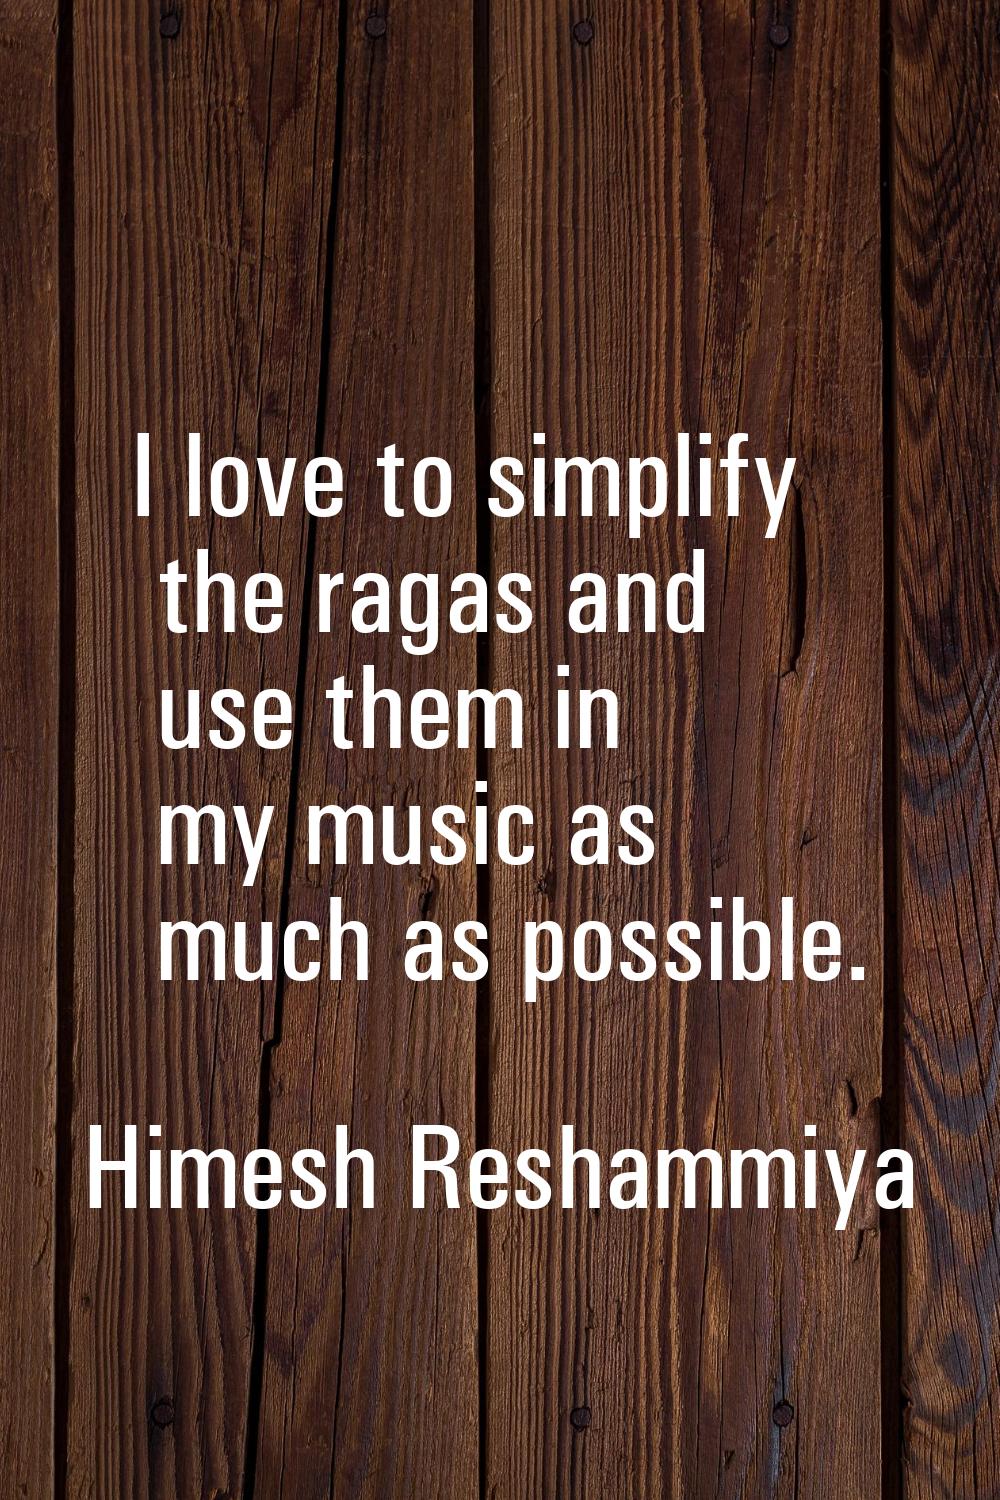 I love to simplify the ragas and use them in my music as much as possible.